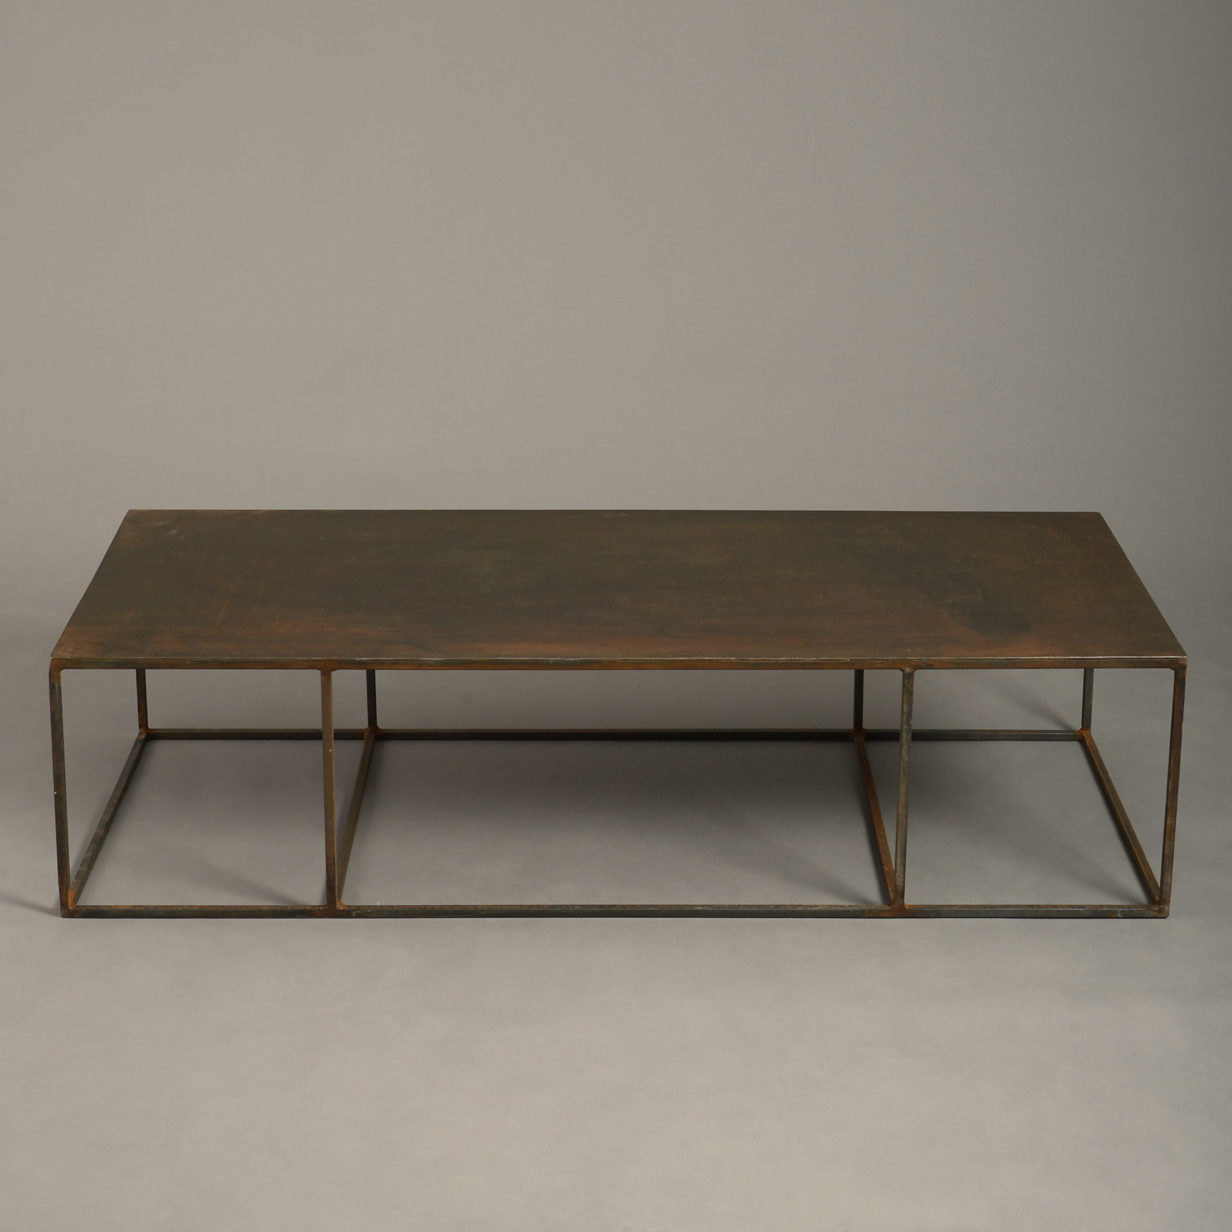 A mid-century steel low table